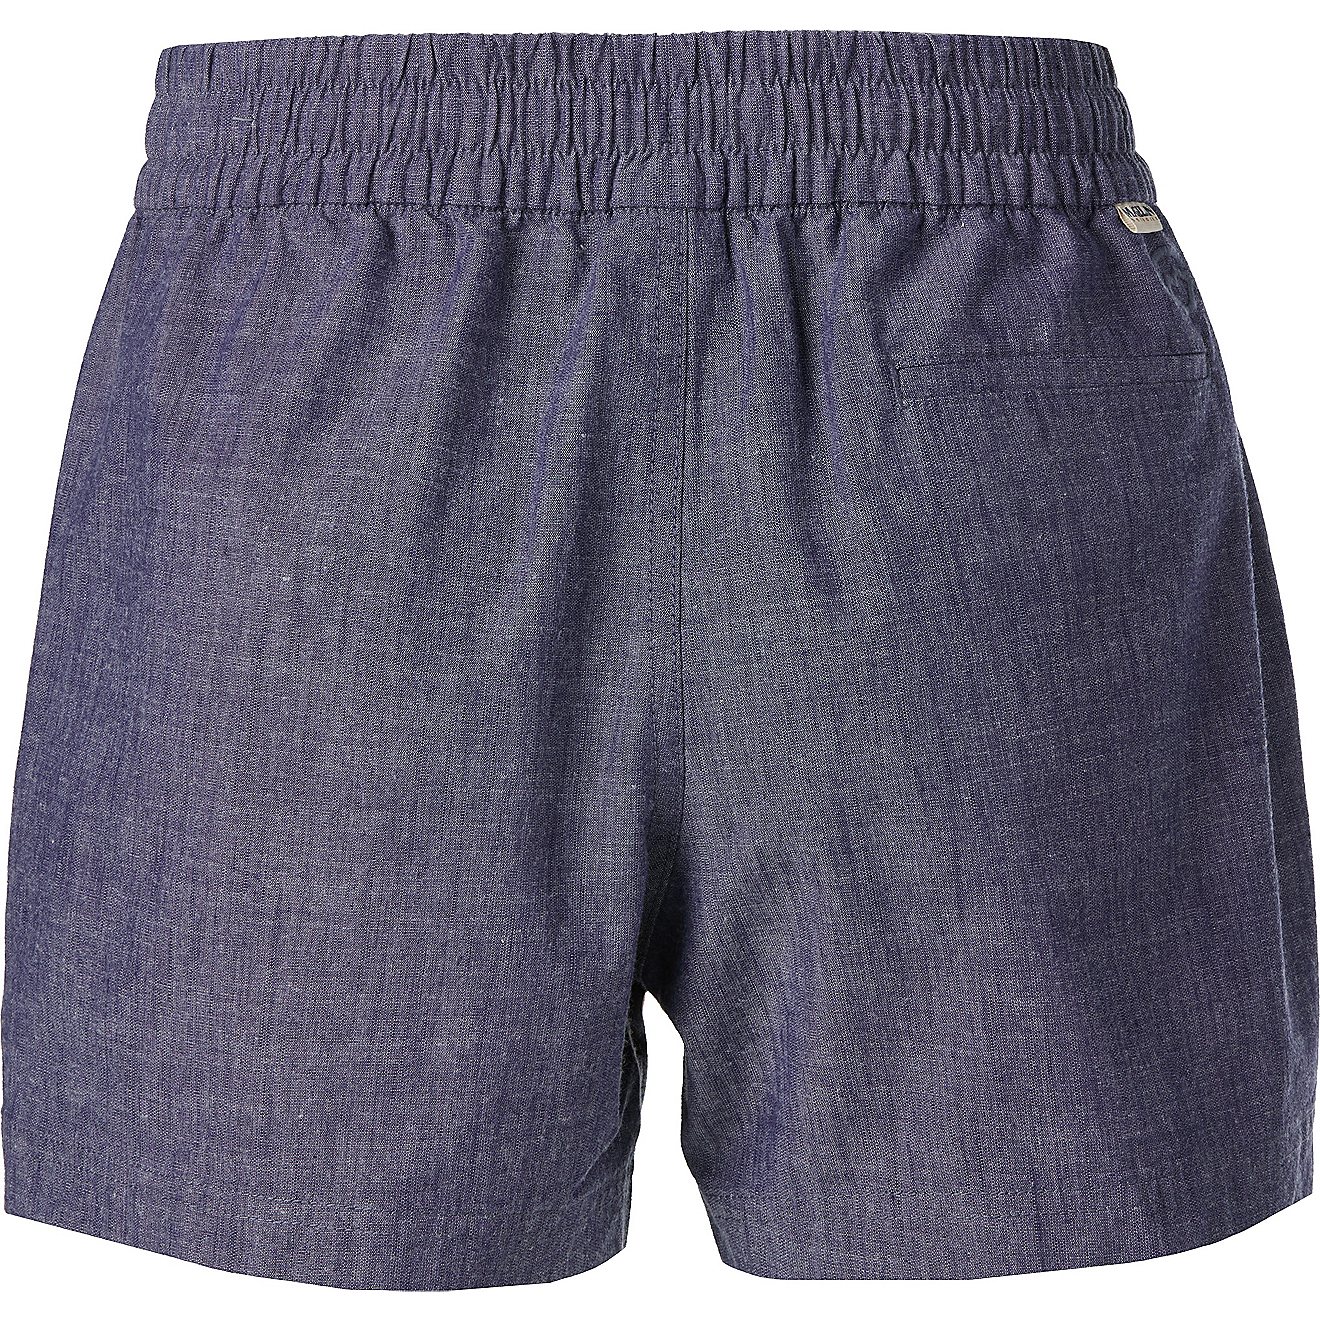 Magellan Outdoors Women's Local State Texas Shorty Shorts                                                                        - view number 2